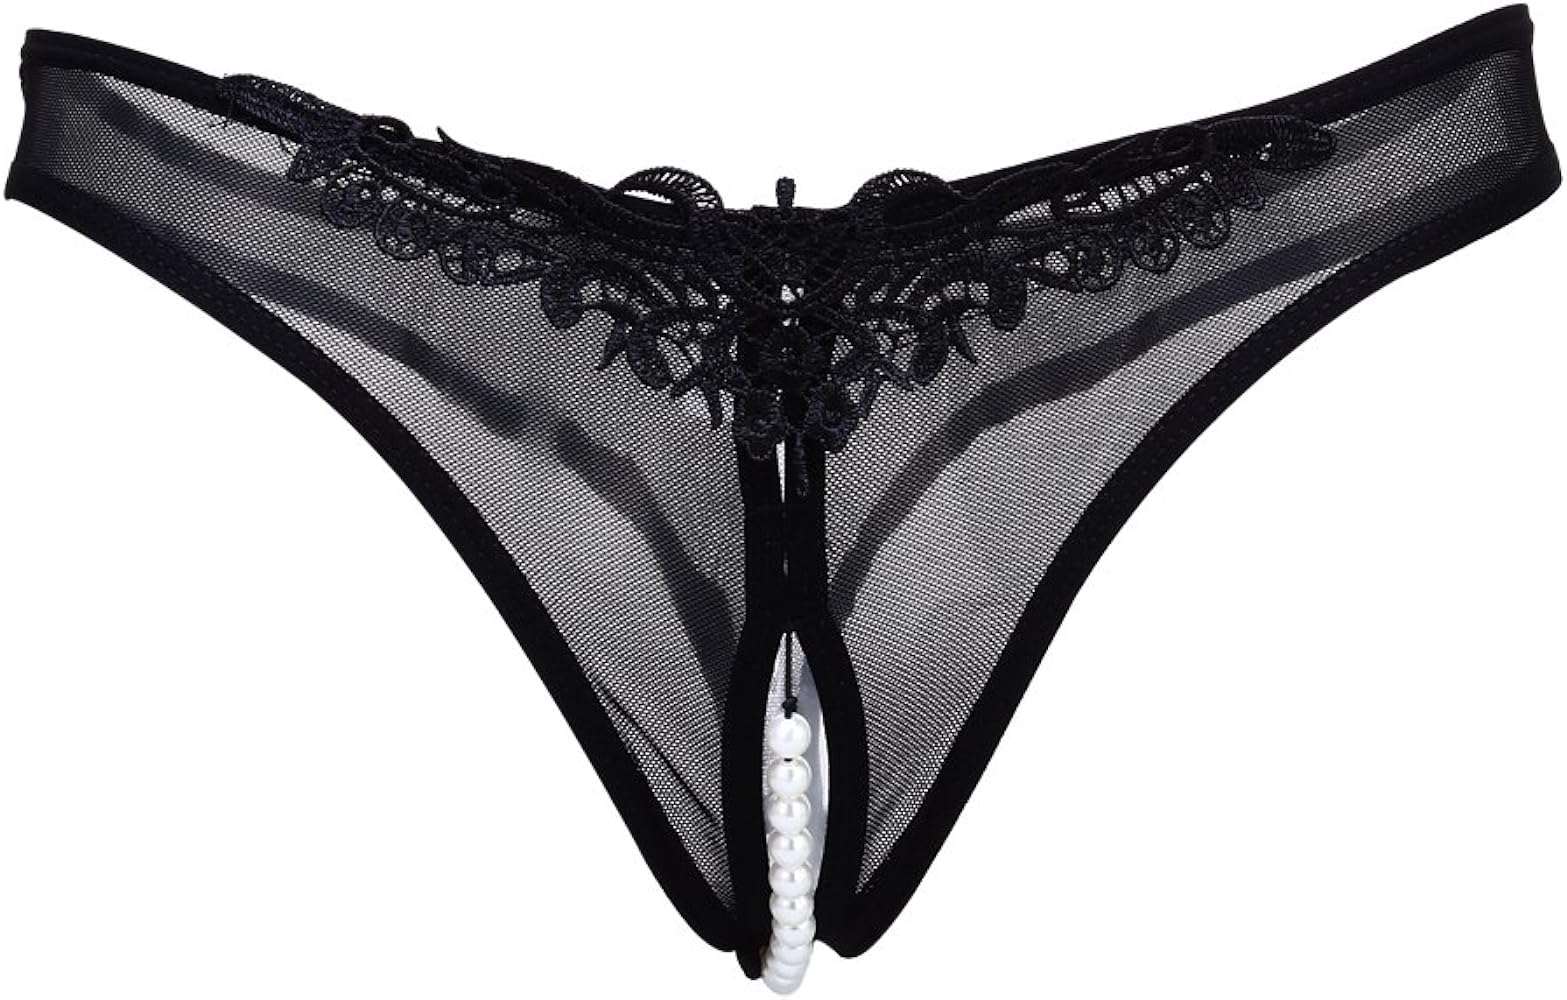 chris lyda recommends Pearl G String Review